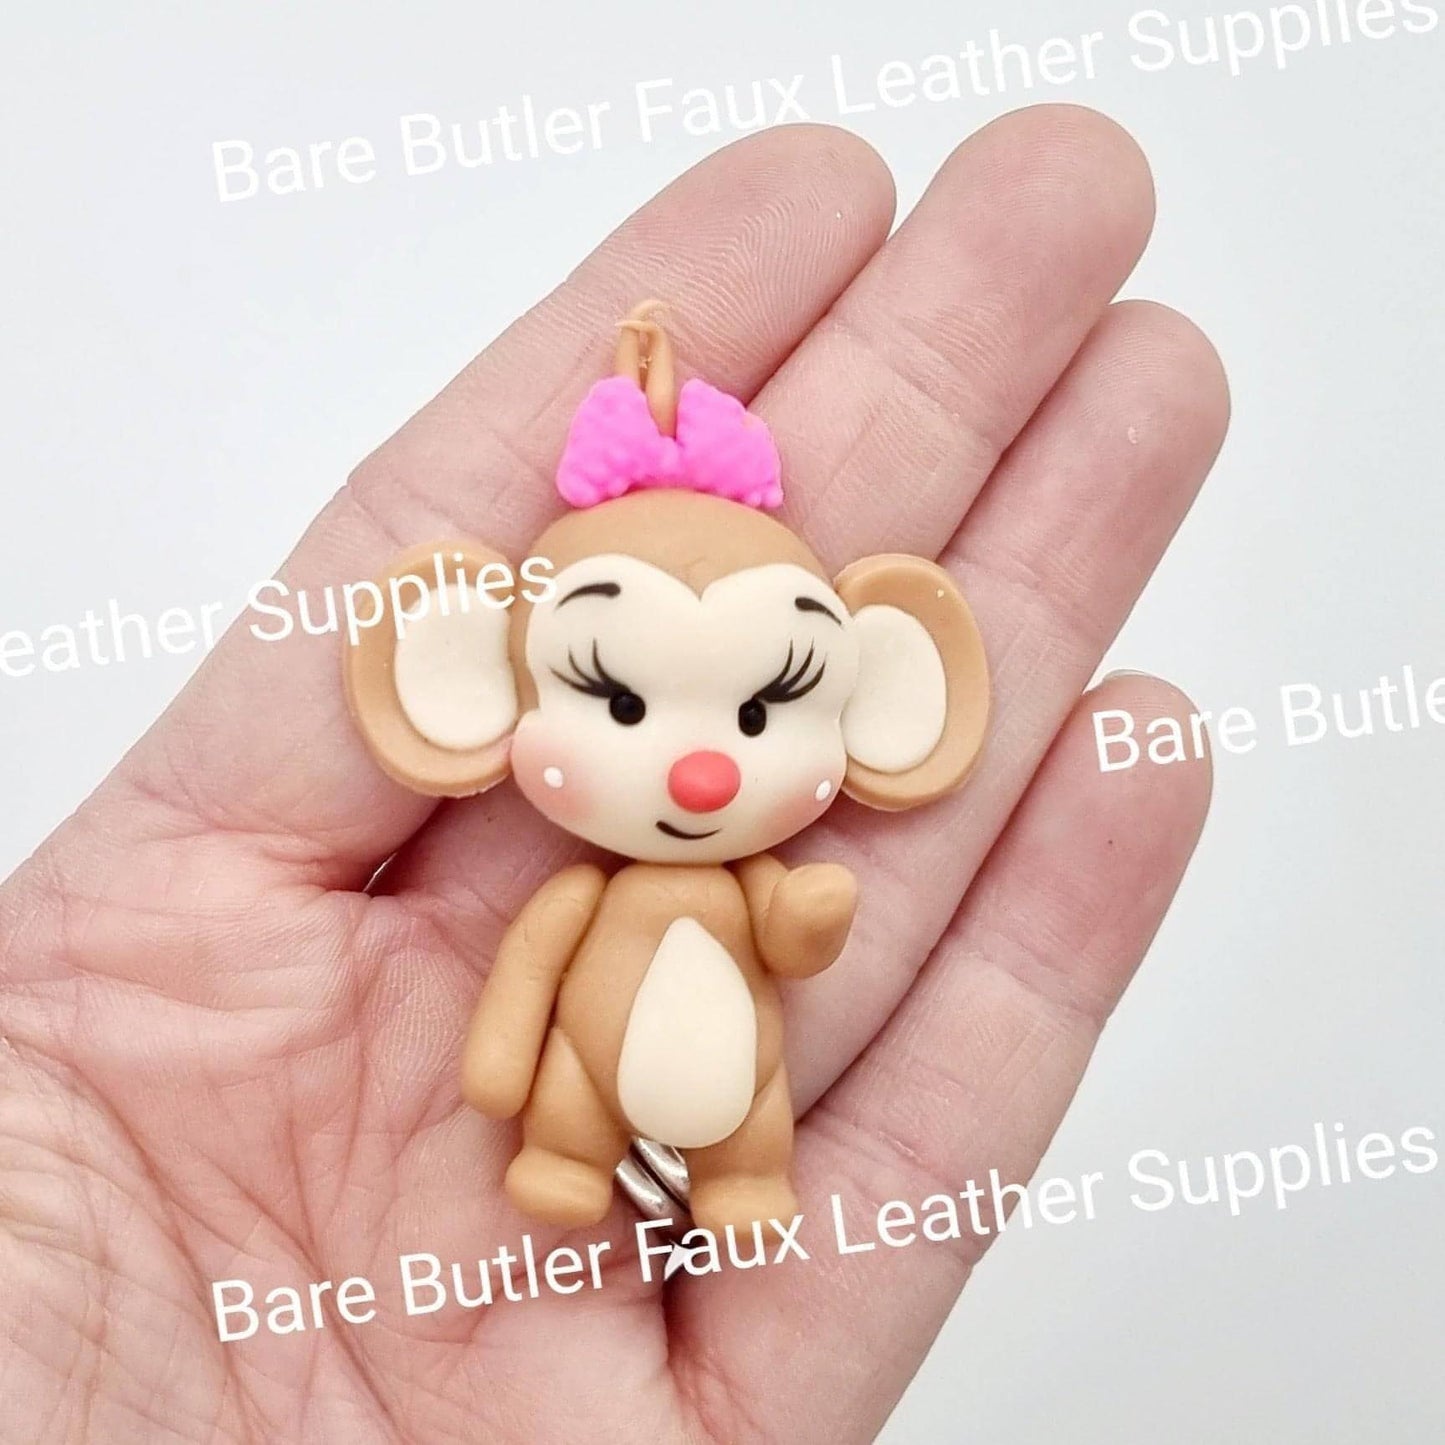 Mona the Monkey - animal, Clay, Clays, farm, jungle, monkey - Bare Butler Faux Leather Supplies 